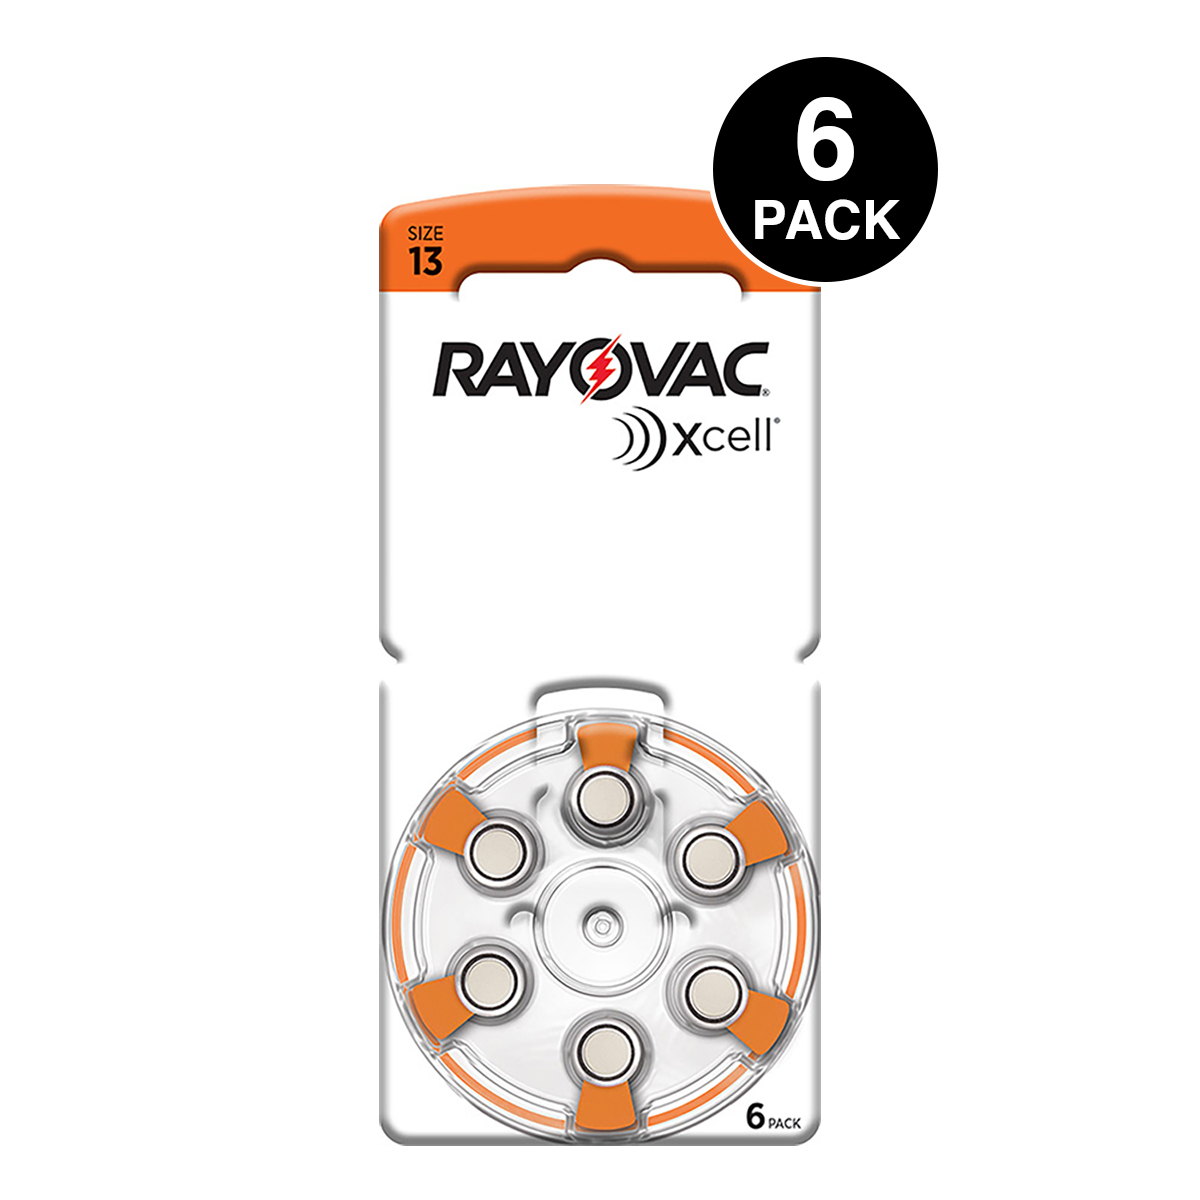 Xcell (Made By Rayovac) Size 13 Hearing Aid Batteries (6pcs)